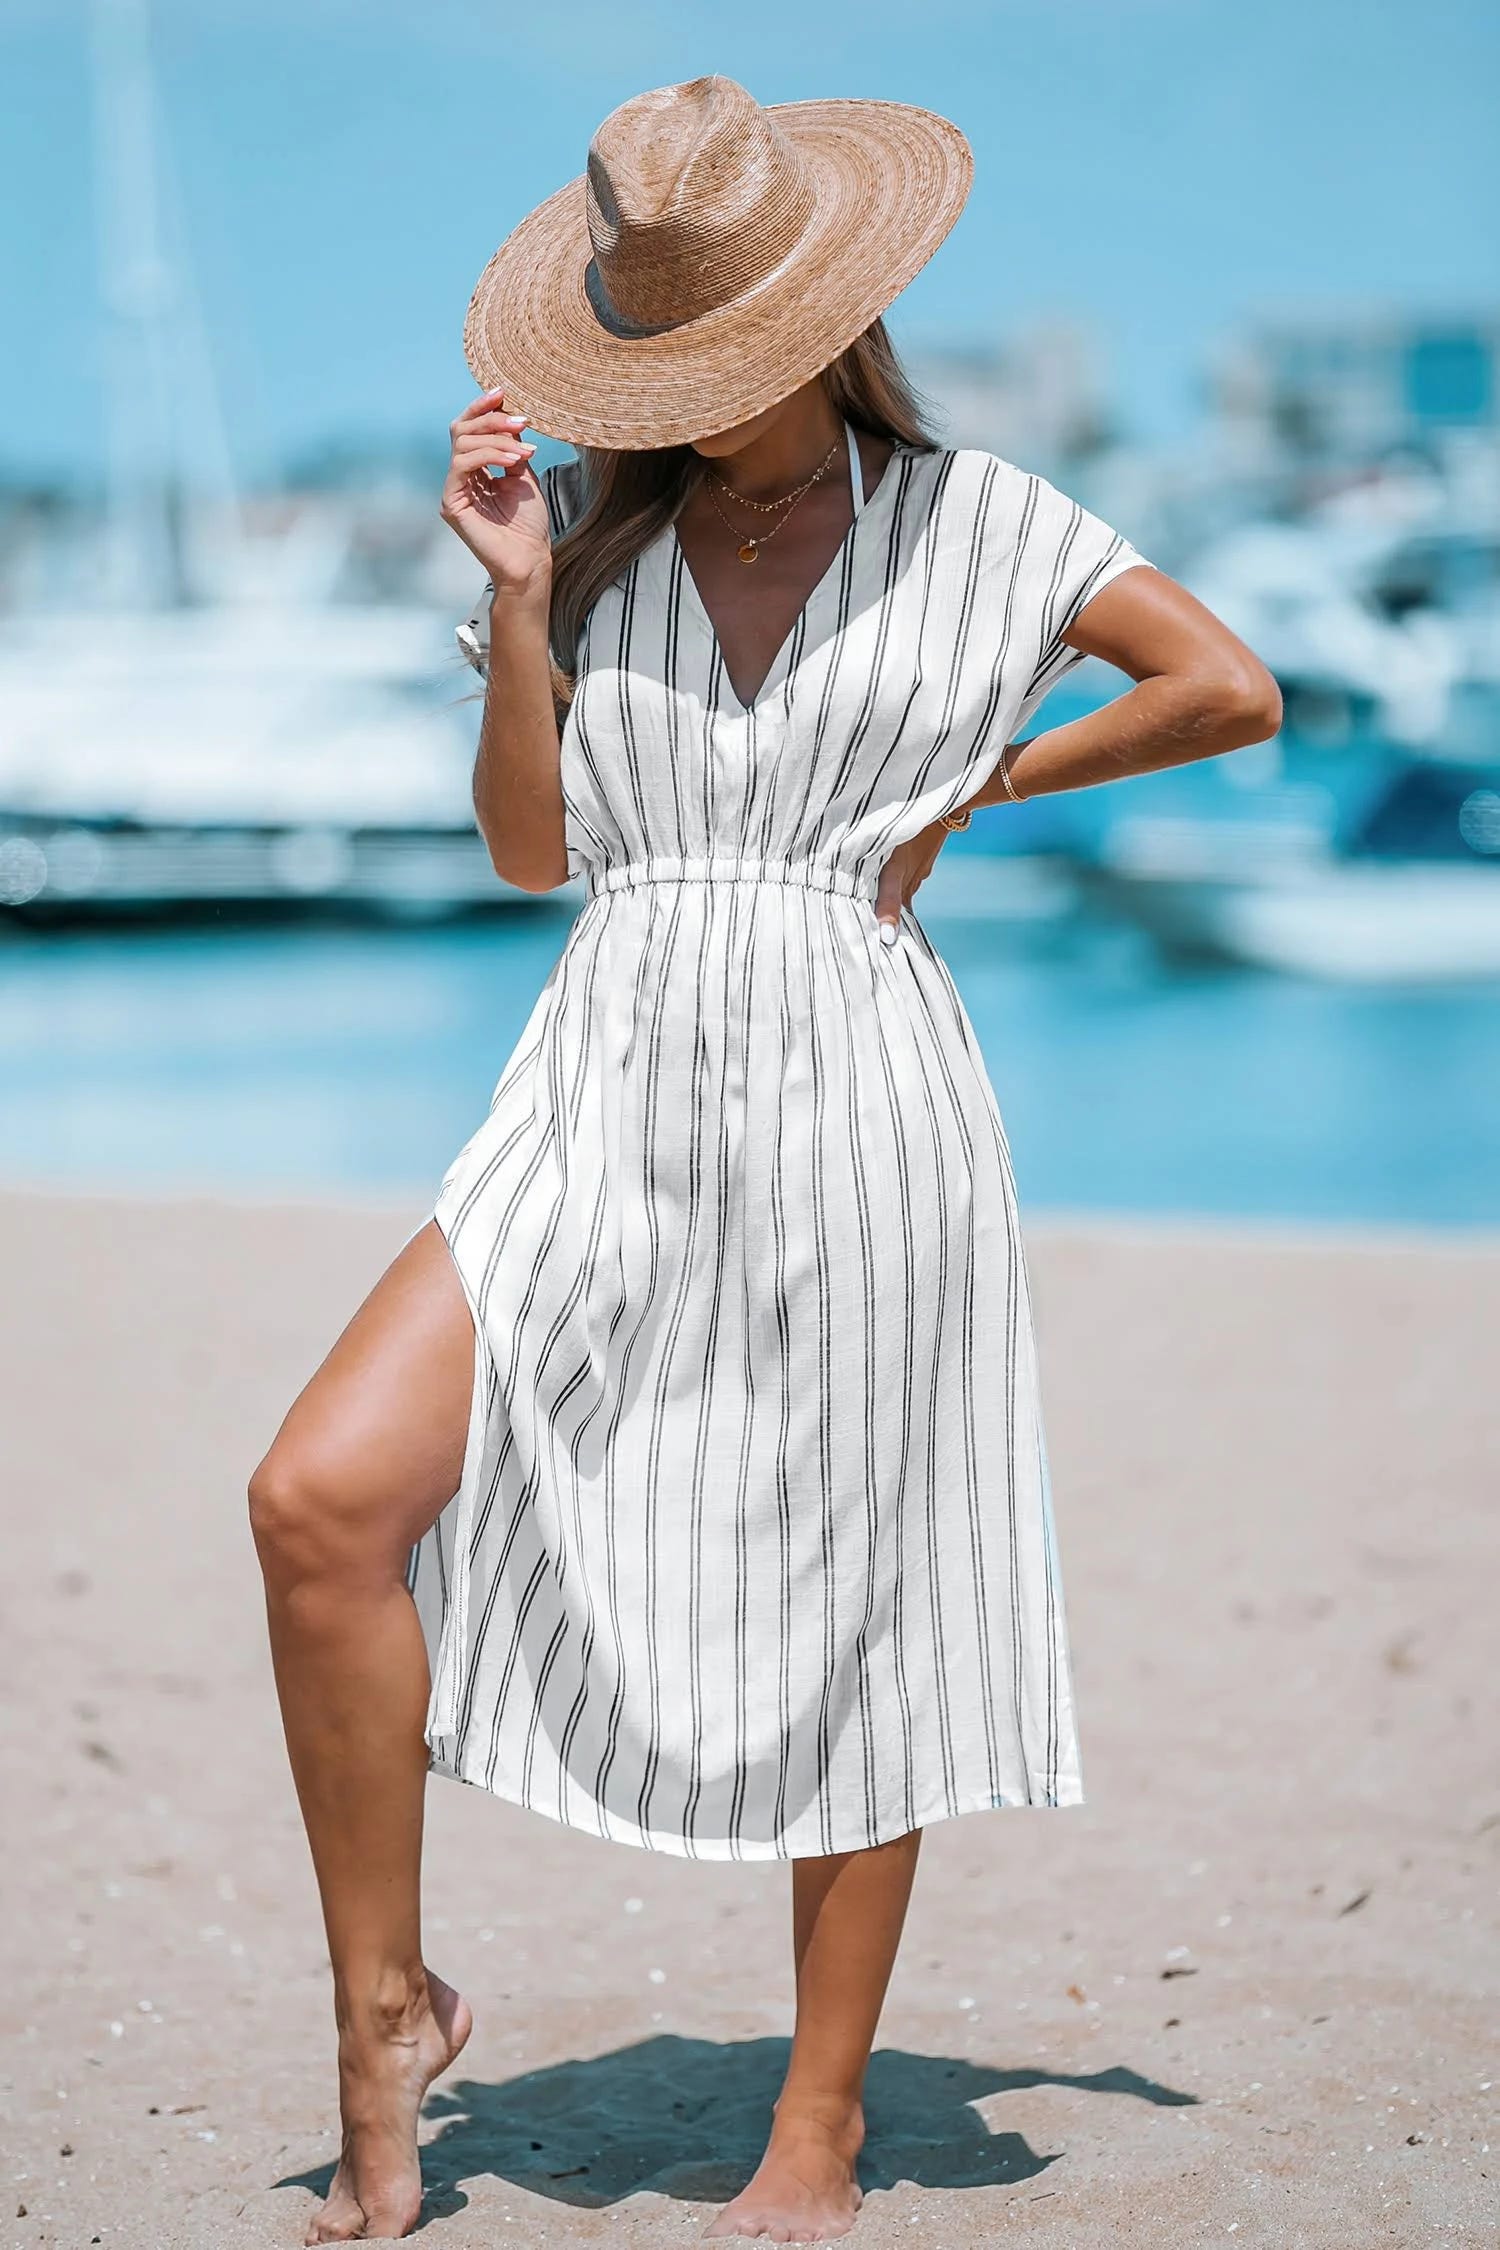 Modern Striped Midi Cover-Up Dress for Beach and Summer Vacation | Image